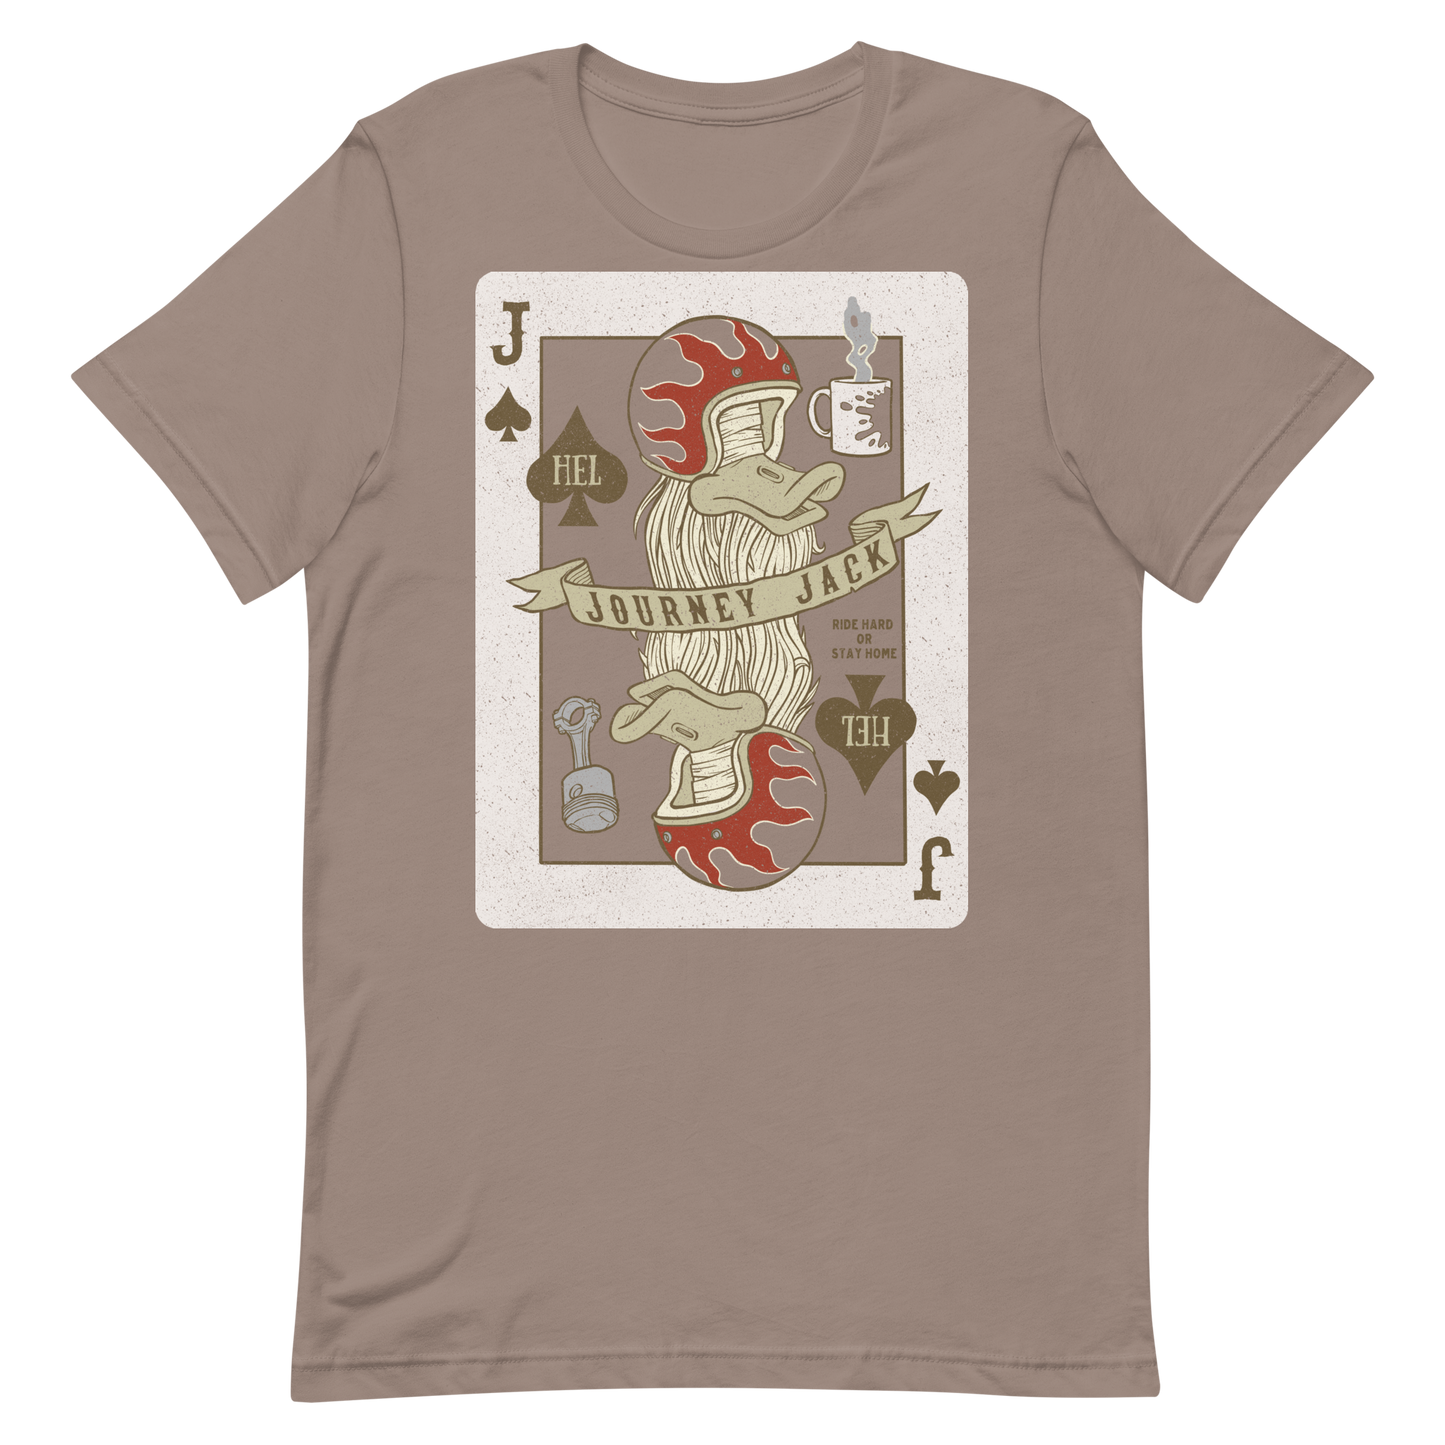 This Journey Jack Motorcycle Playing Card t-shirt is everything you've dreamed of and more. It feels soft and lightweight, with the right amount of stretch. It's comfortable and flattering for all.